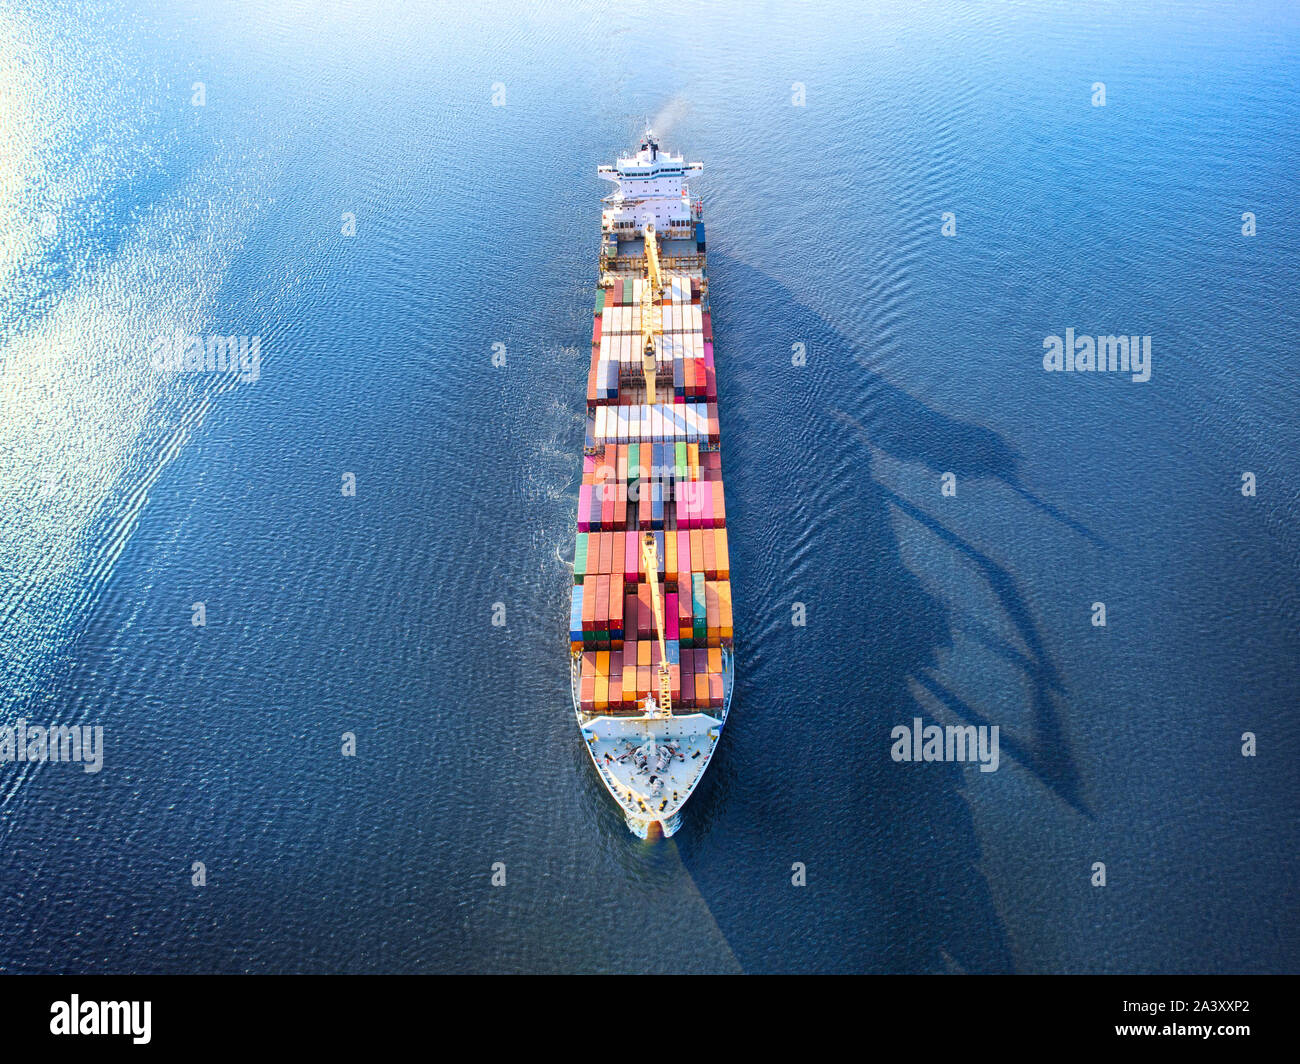 Large full loaded container ship sailing high seas. Aerial front view, hdr image Stock Photo